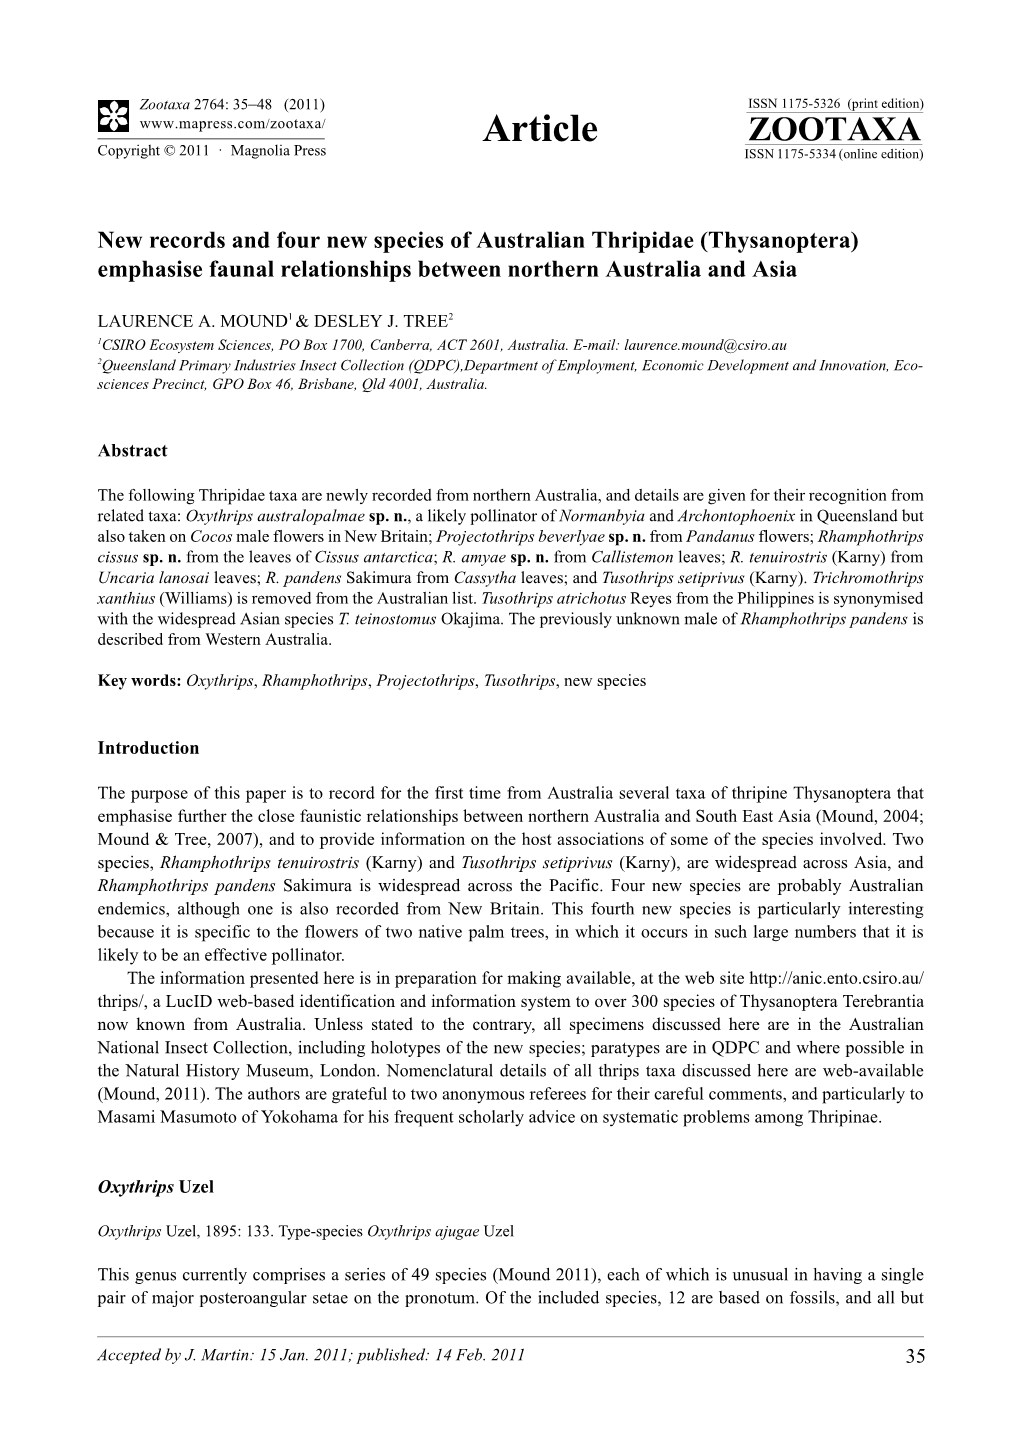 Thysanoptera) Emphasise Faunal Relationships Between Northern Australia and Asia